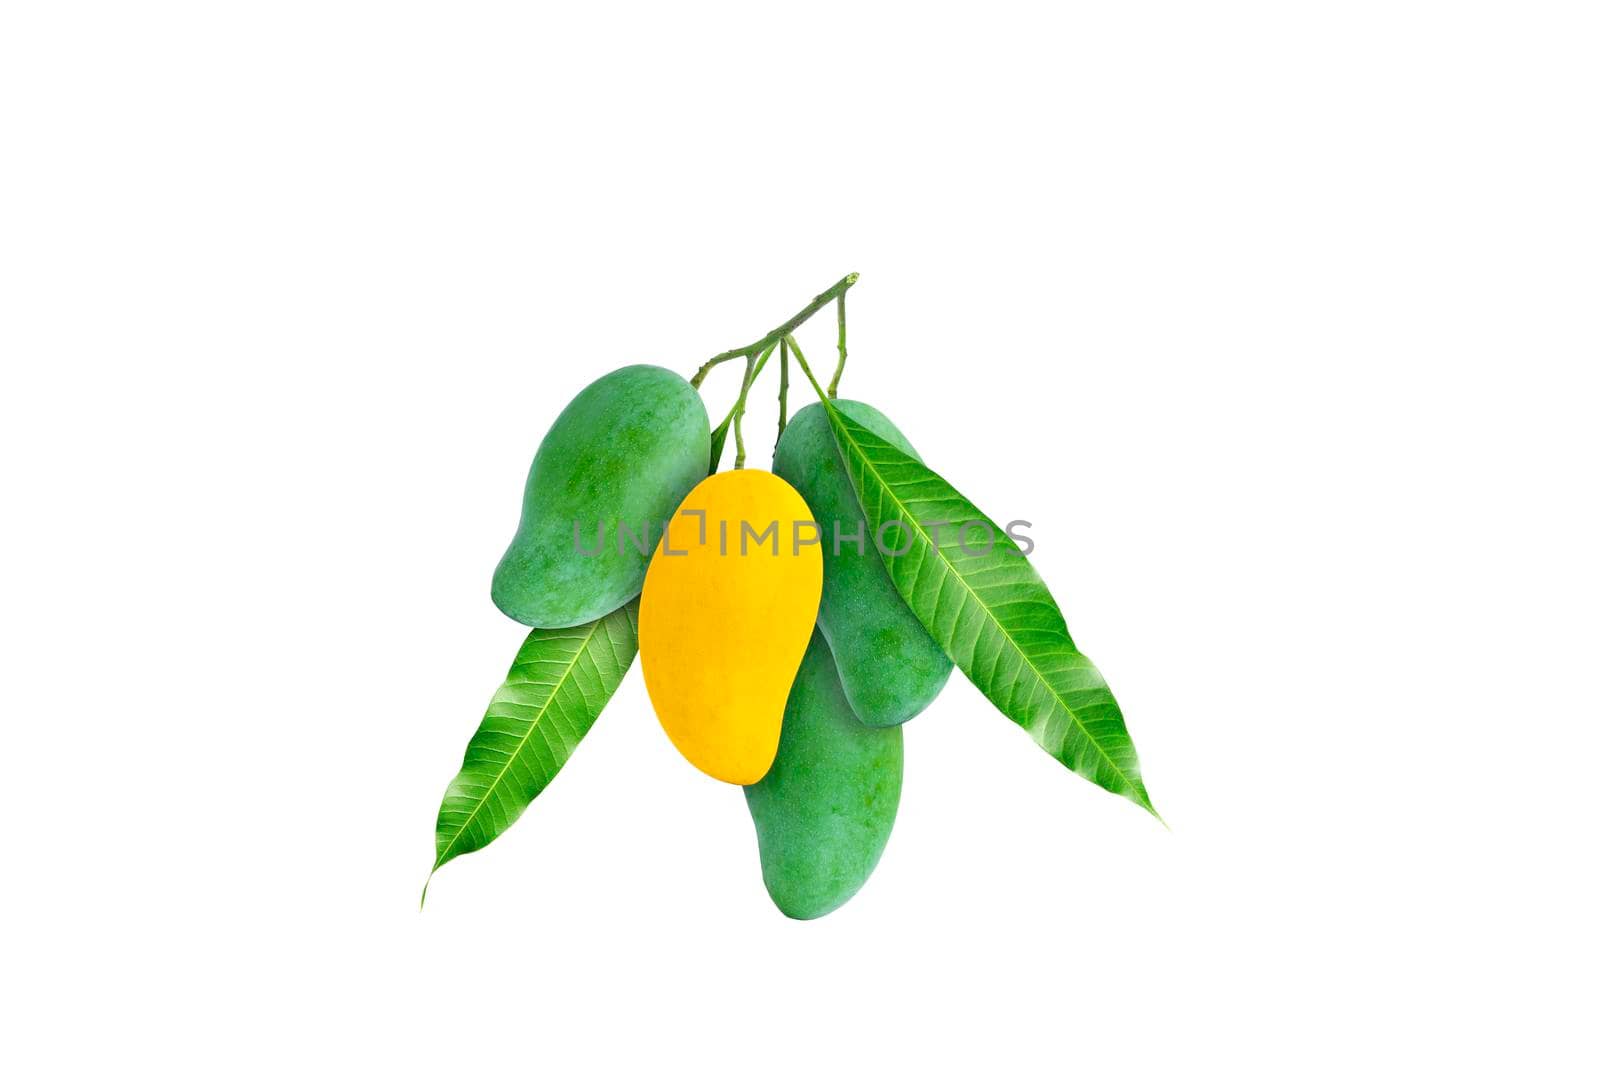 One of yellow ripe mango is in the middle of a cluster of raw mangoes and green leaves on white background.